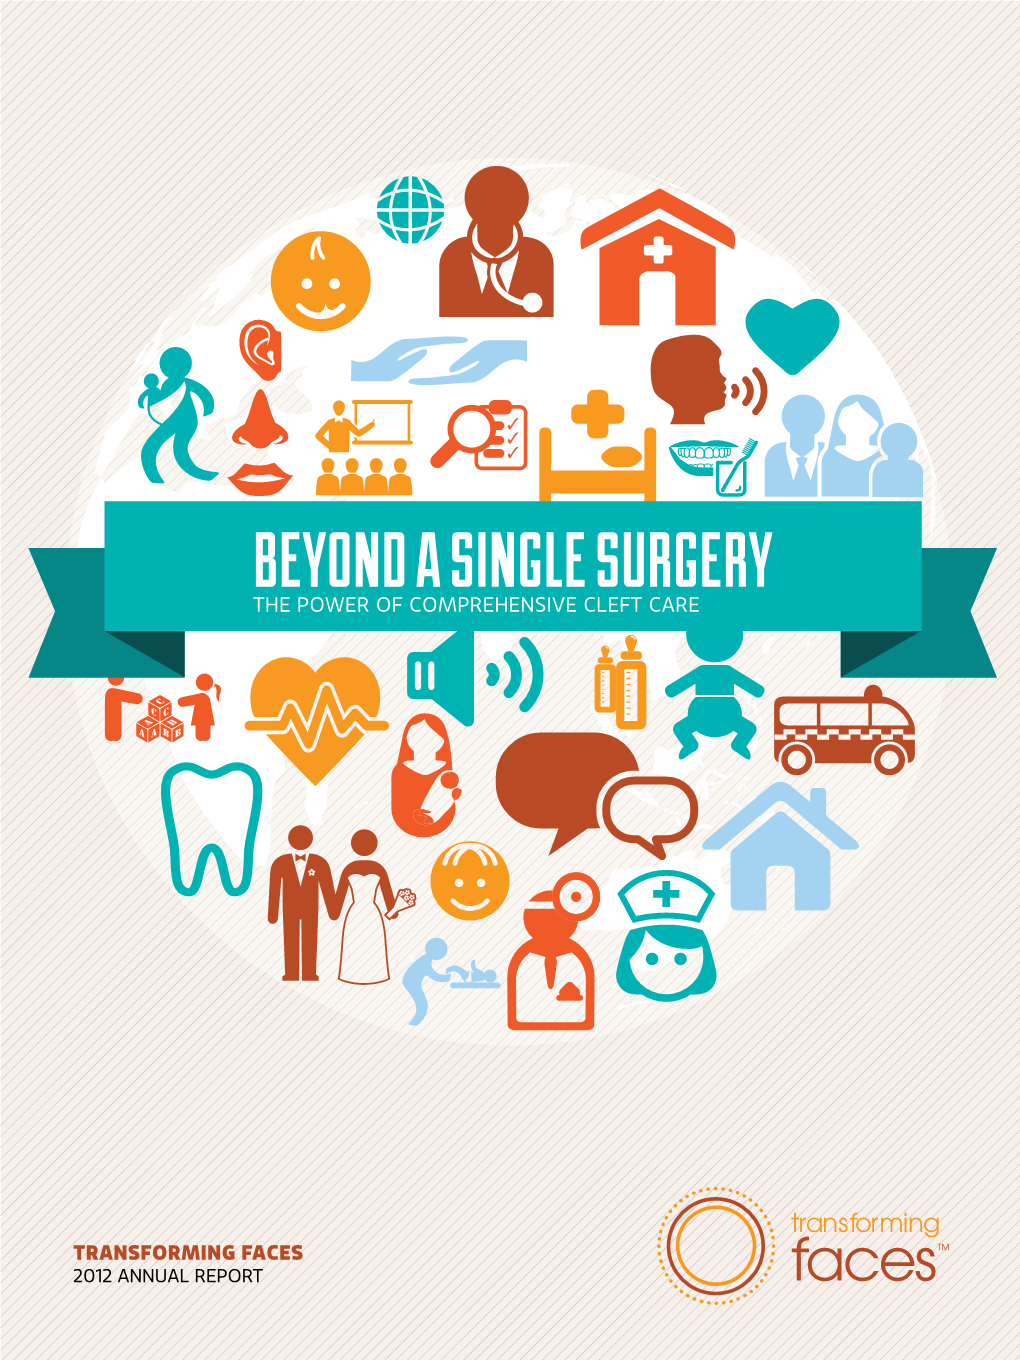 Beyond a Single Surgery the Power of Comprehensive Cleft Care